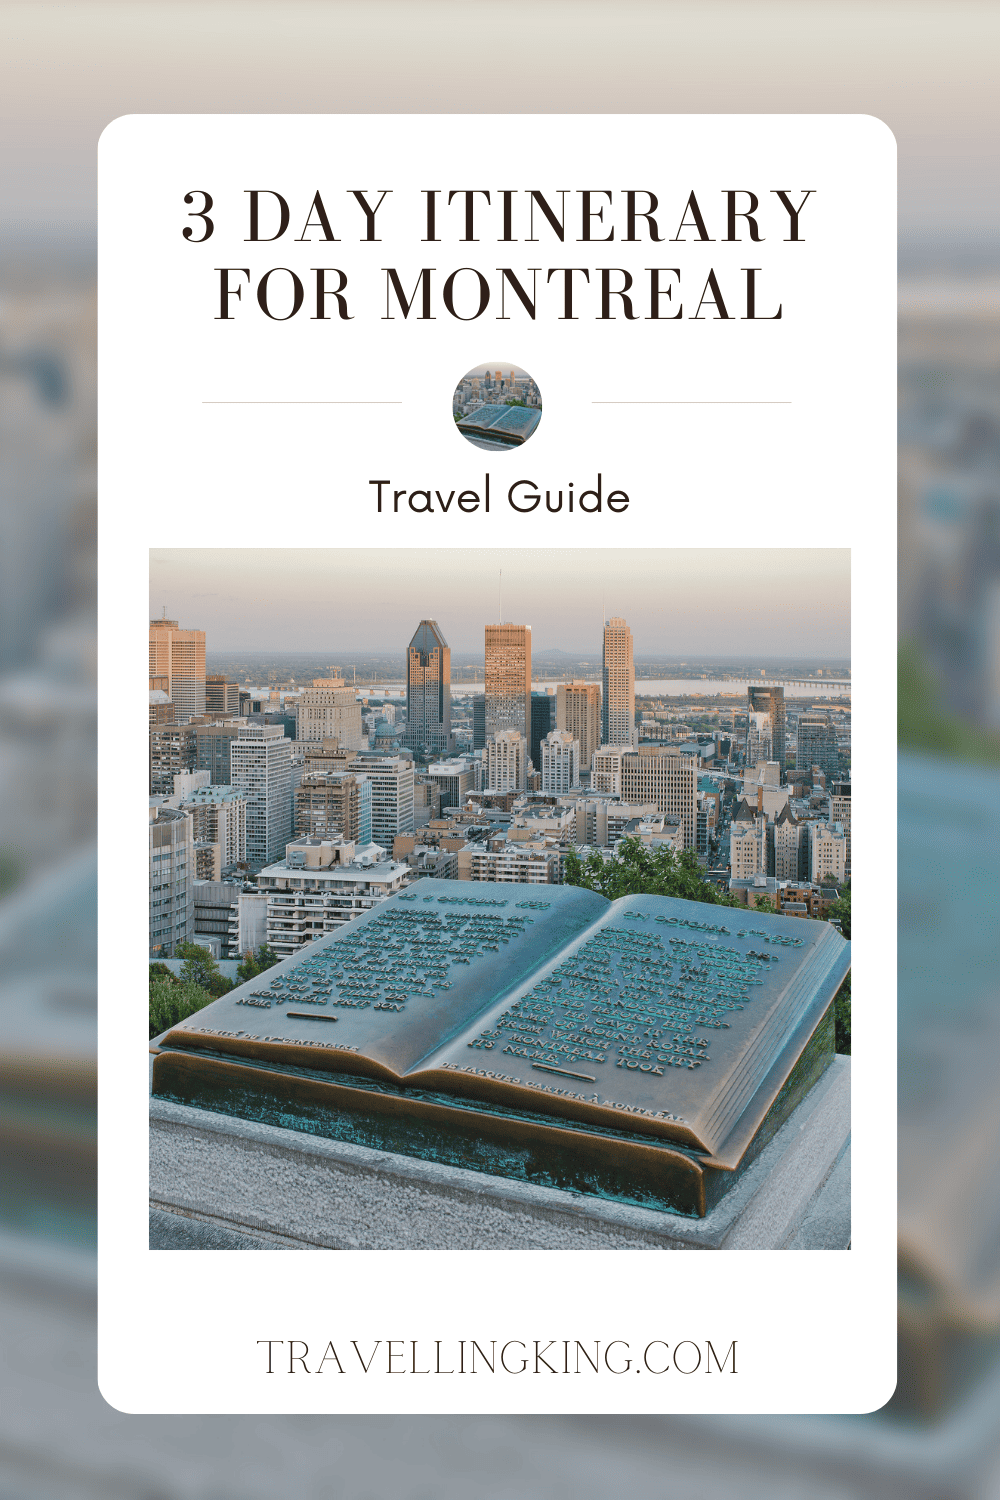 3 Day Itinerary for Montreal